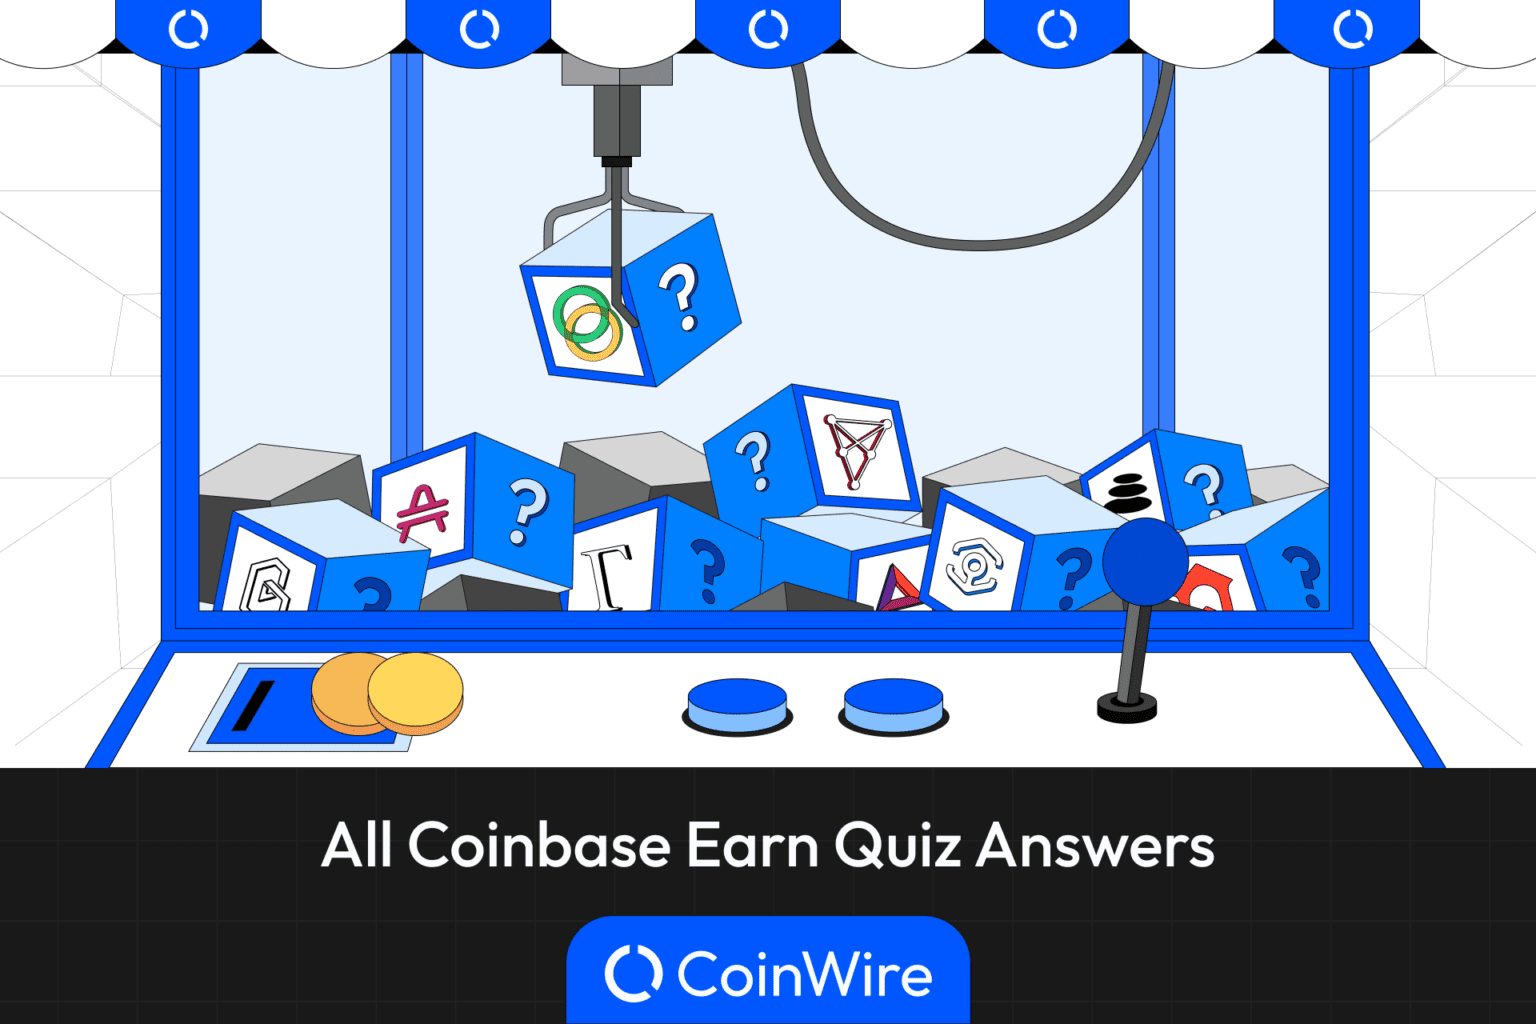 coinbase quiz answers